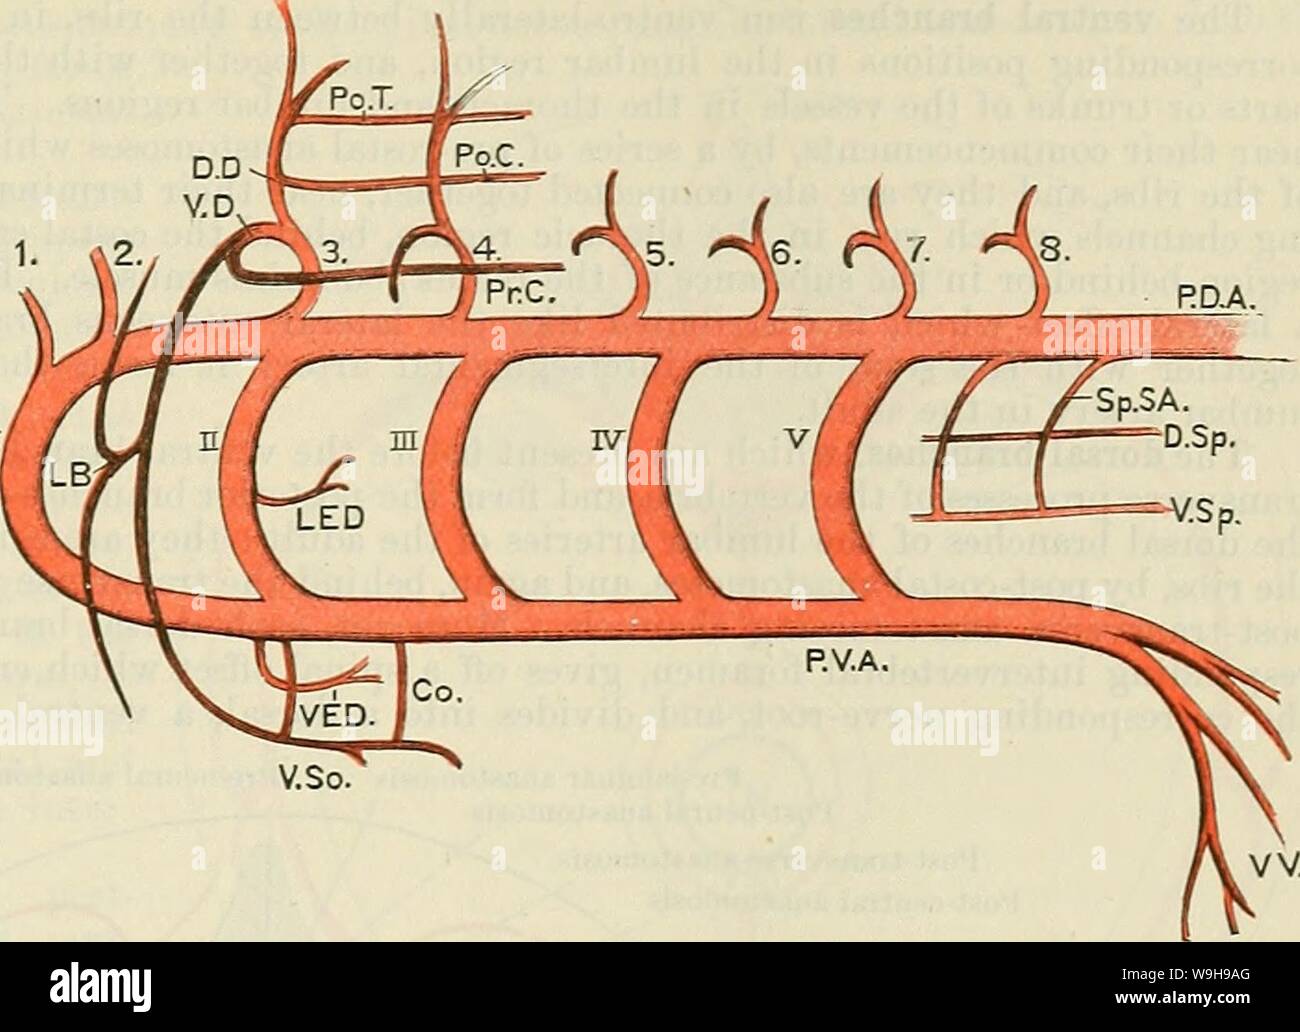 Archive image from page 1076 of Cunningham's Text-book of anatomy (1914). Cunningham's Text-book of anatomy  cunninghamstextb00cunn Year: 1914 ( THE SEGMENTAL AETEEIES AND THEIE ANASTOMOSES. 1043 So.SA. 'V 4 V 4 The segmental arteries and veins form a series of bilaterally symmetrical vessels, each of which is united to the vessels of adjacent segments by intersegmental channels, which anastomose with one another, through the portions of the segmental vessels which they connect together, and thus form longi- tudinal trunks. The longitudinal trunks are mainly, though not exclusively, in- terseg Stock Photo